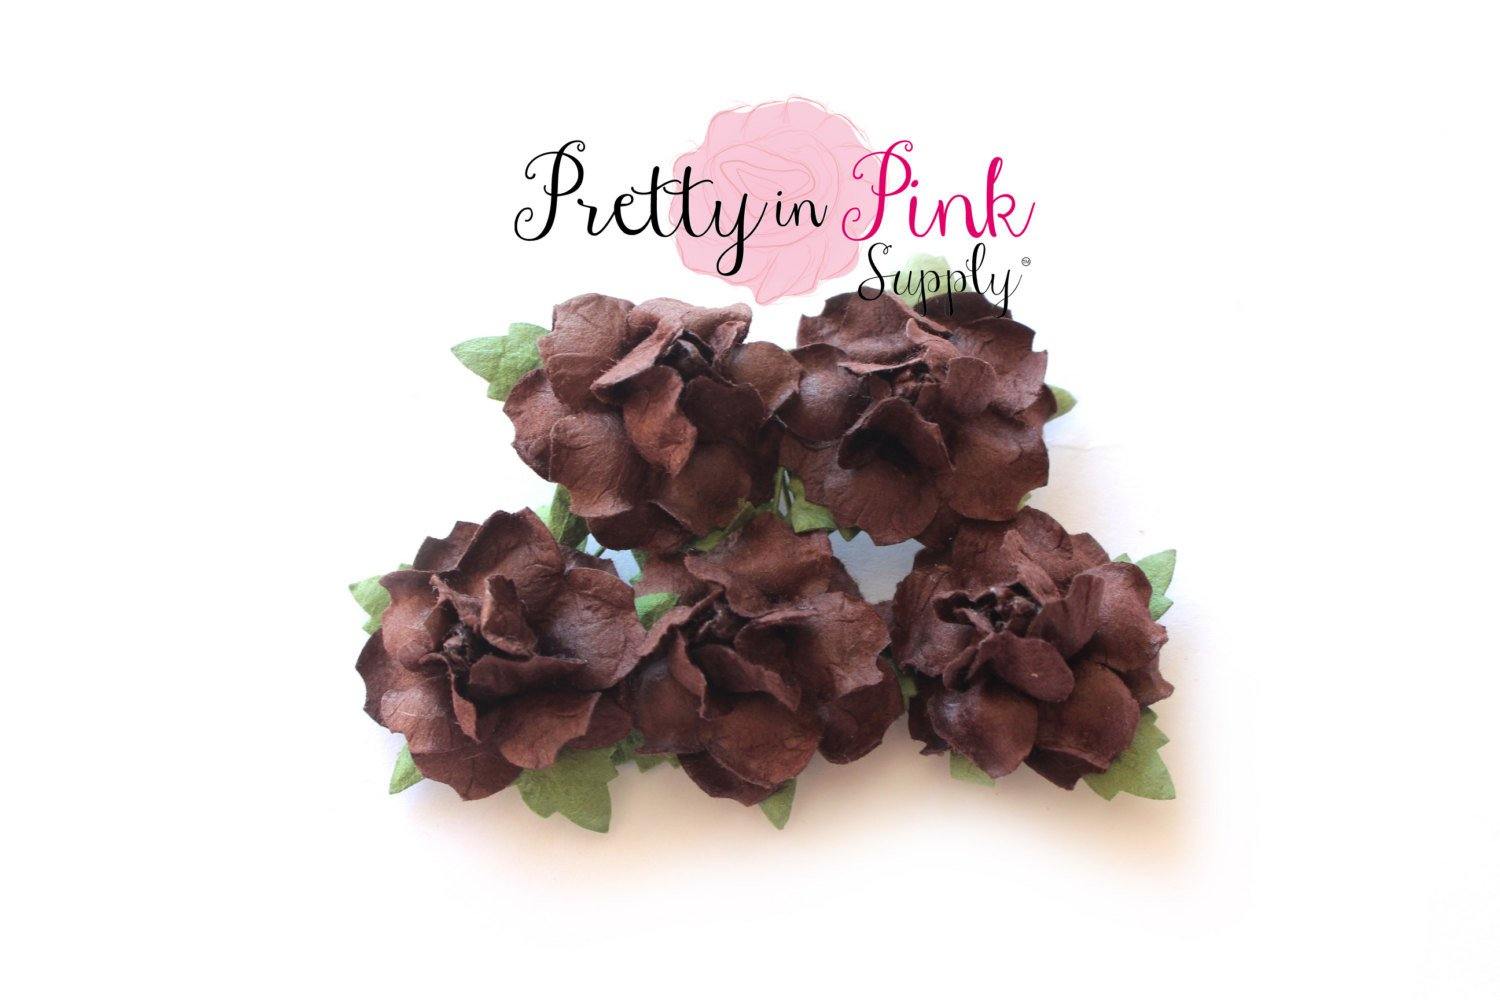 1" PREMIUM Brown Paper Flowers - Pretty in Pink Supply